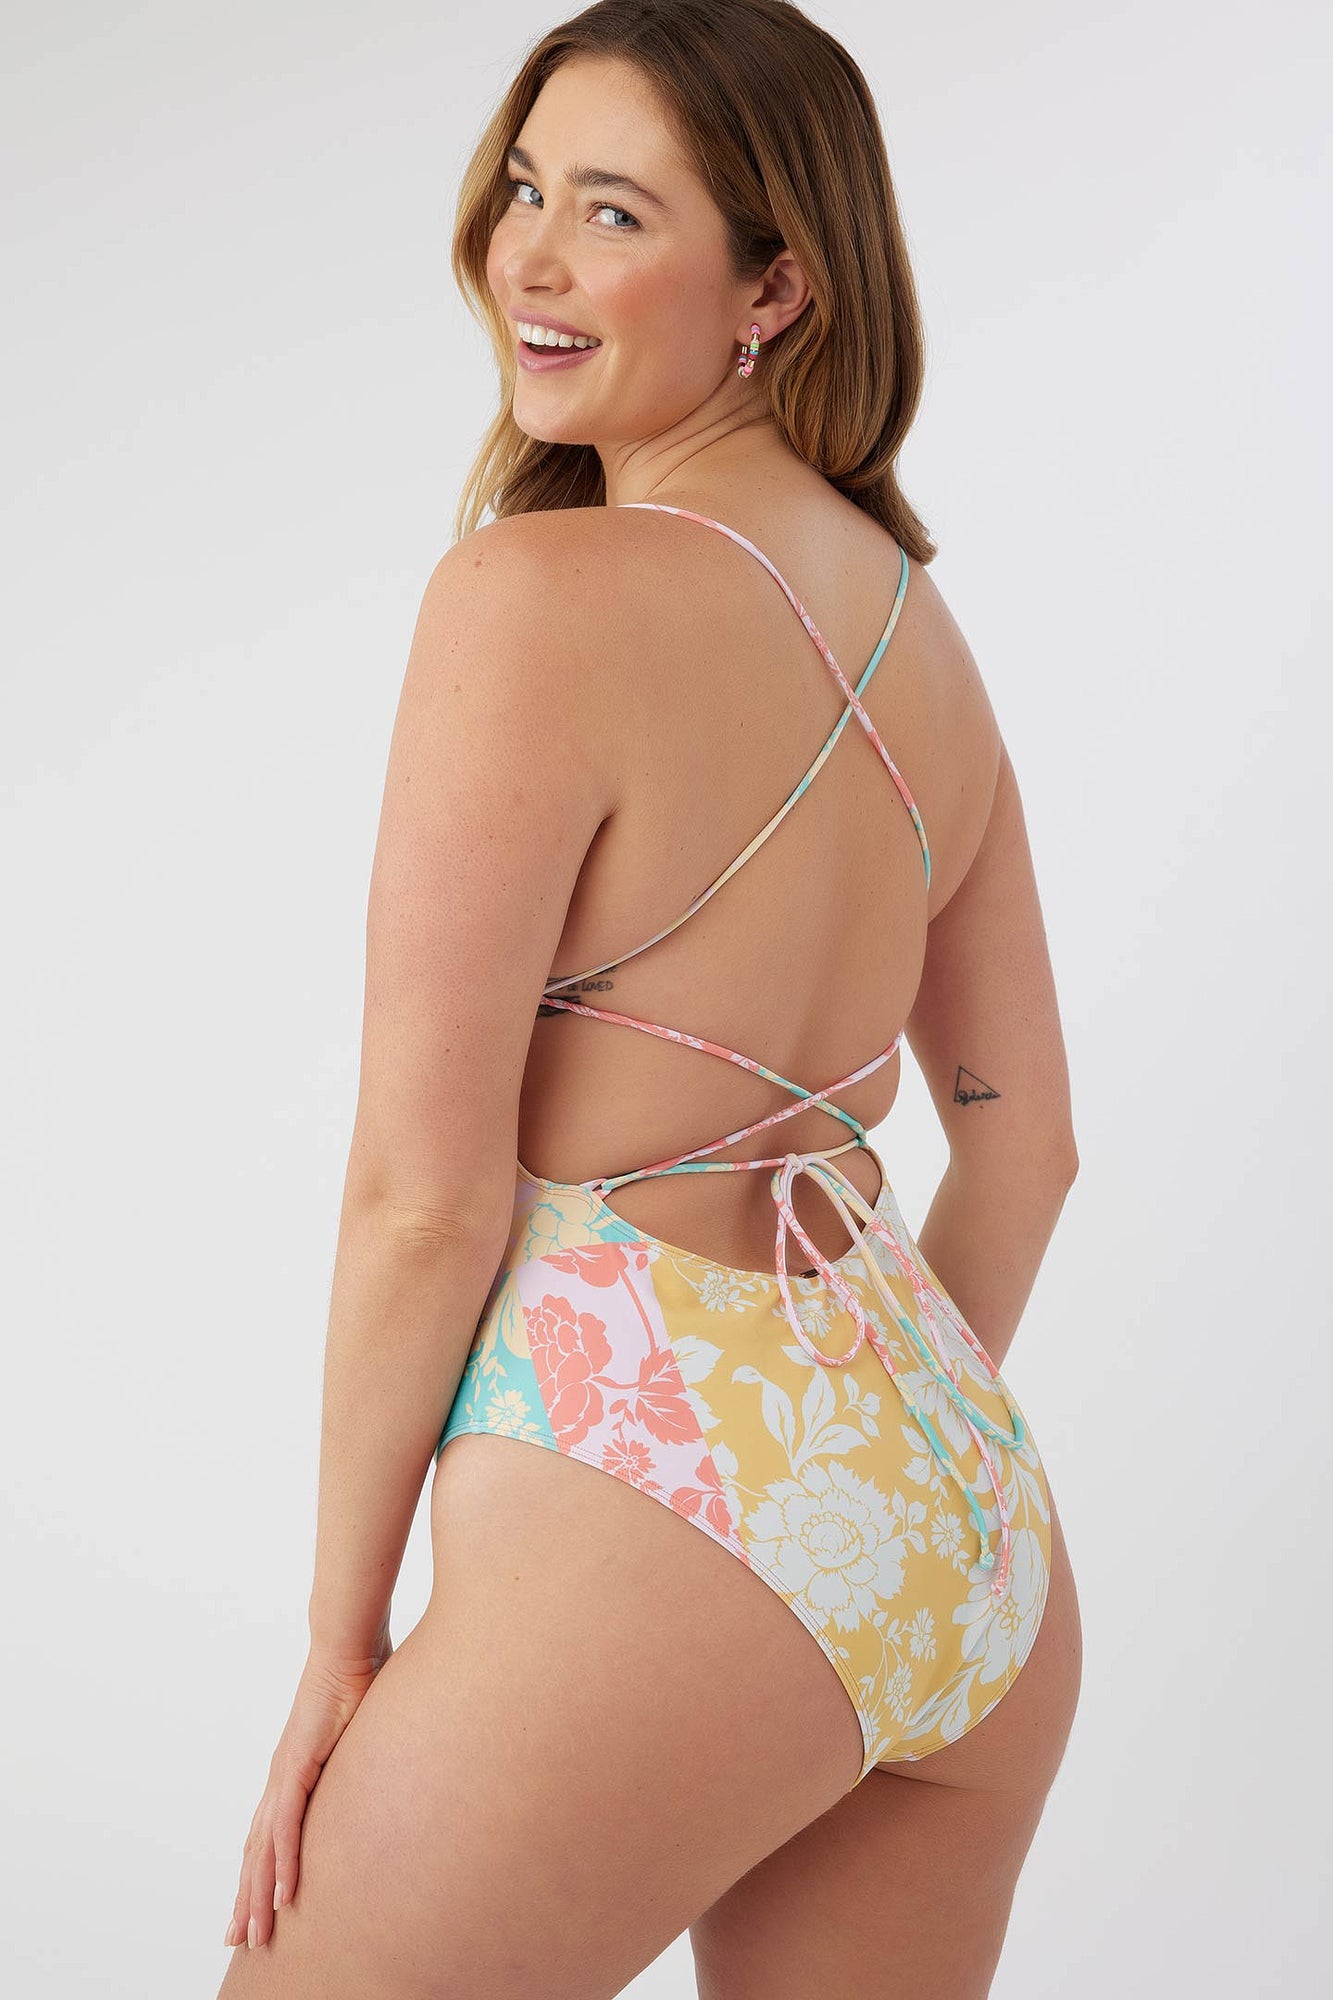 $130 O'Neill Women Brown Floral Stretch One-Piece Cheeky Keyhole